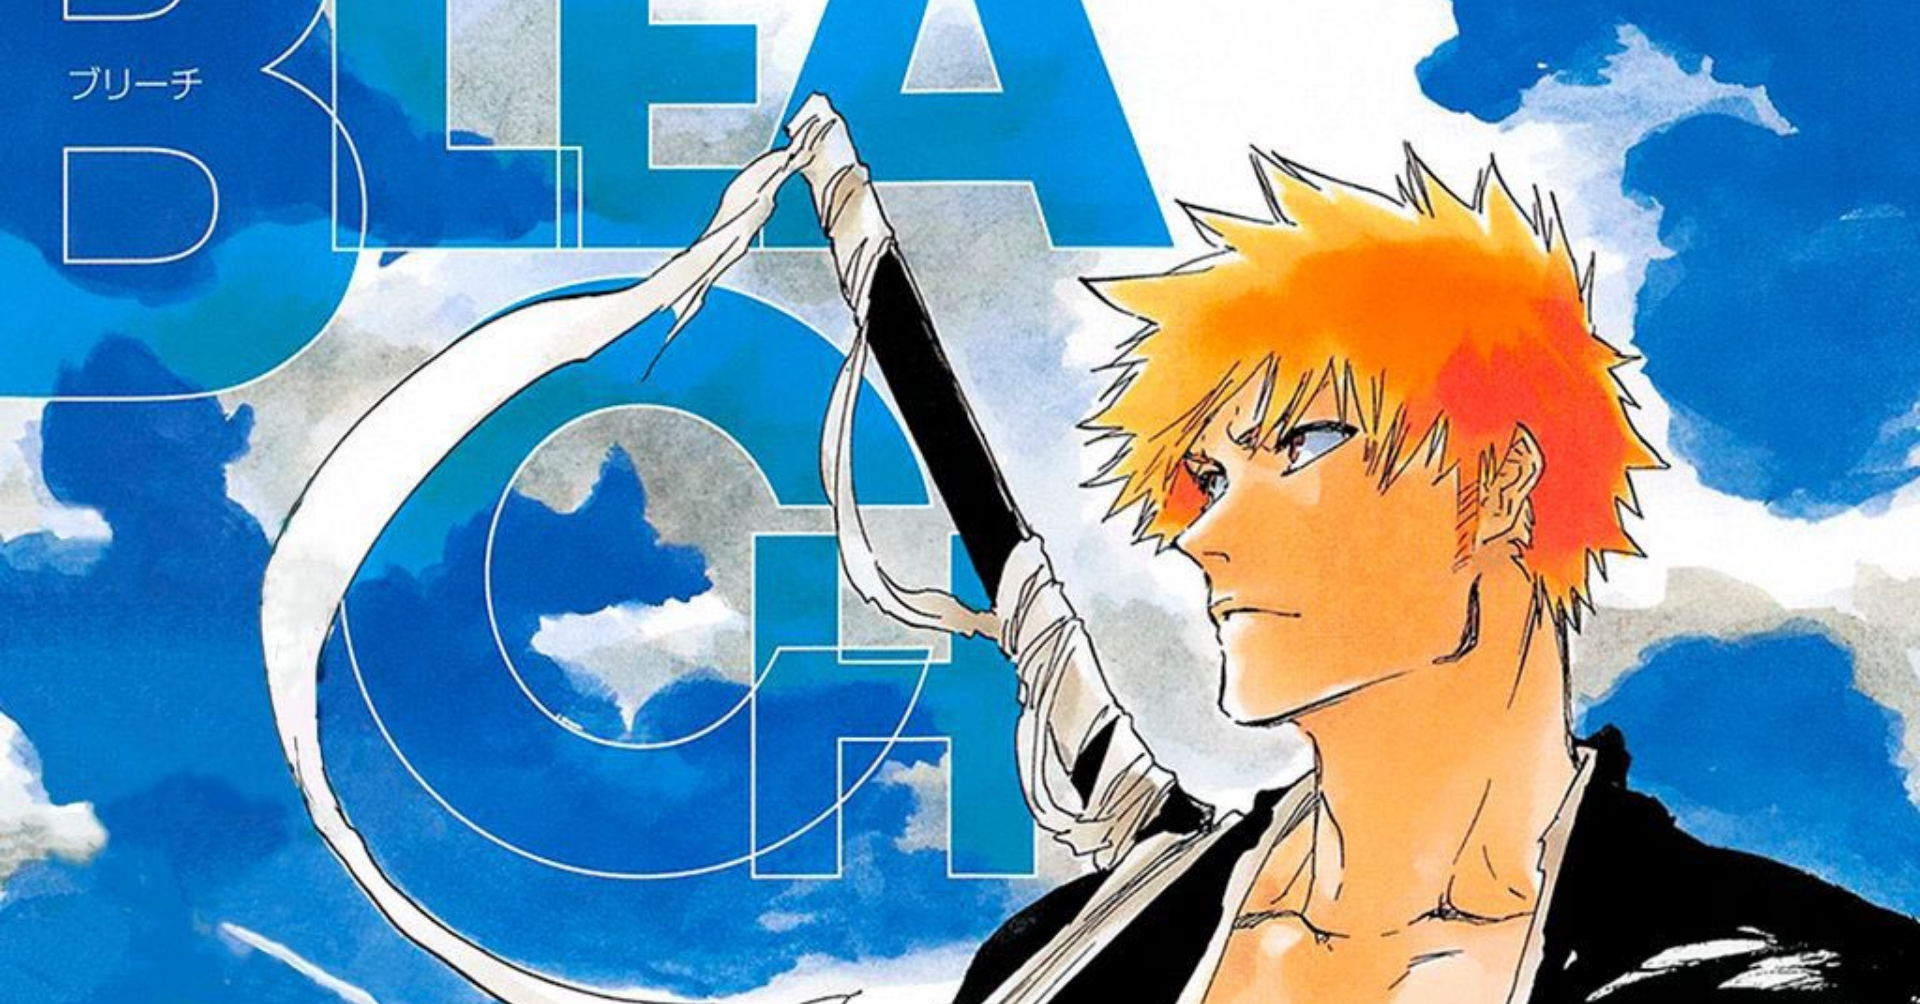 Bleach Thousand-Year Blood War arc: What you need to know before Jump Festa  2022